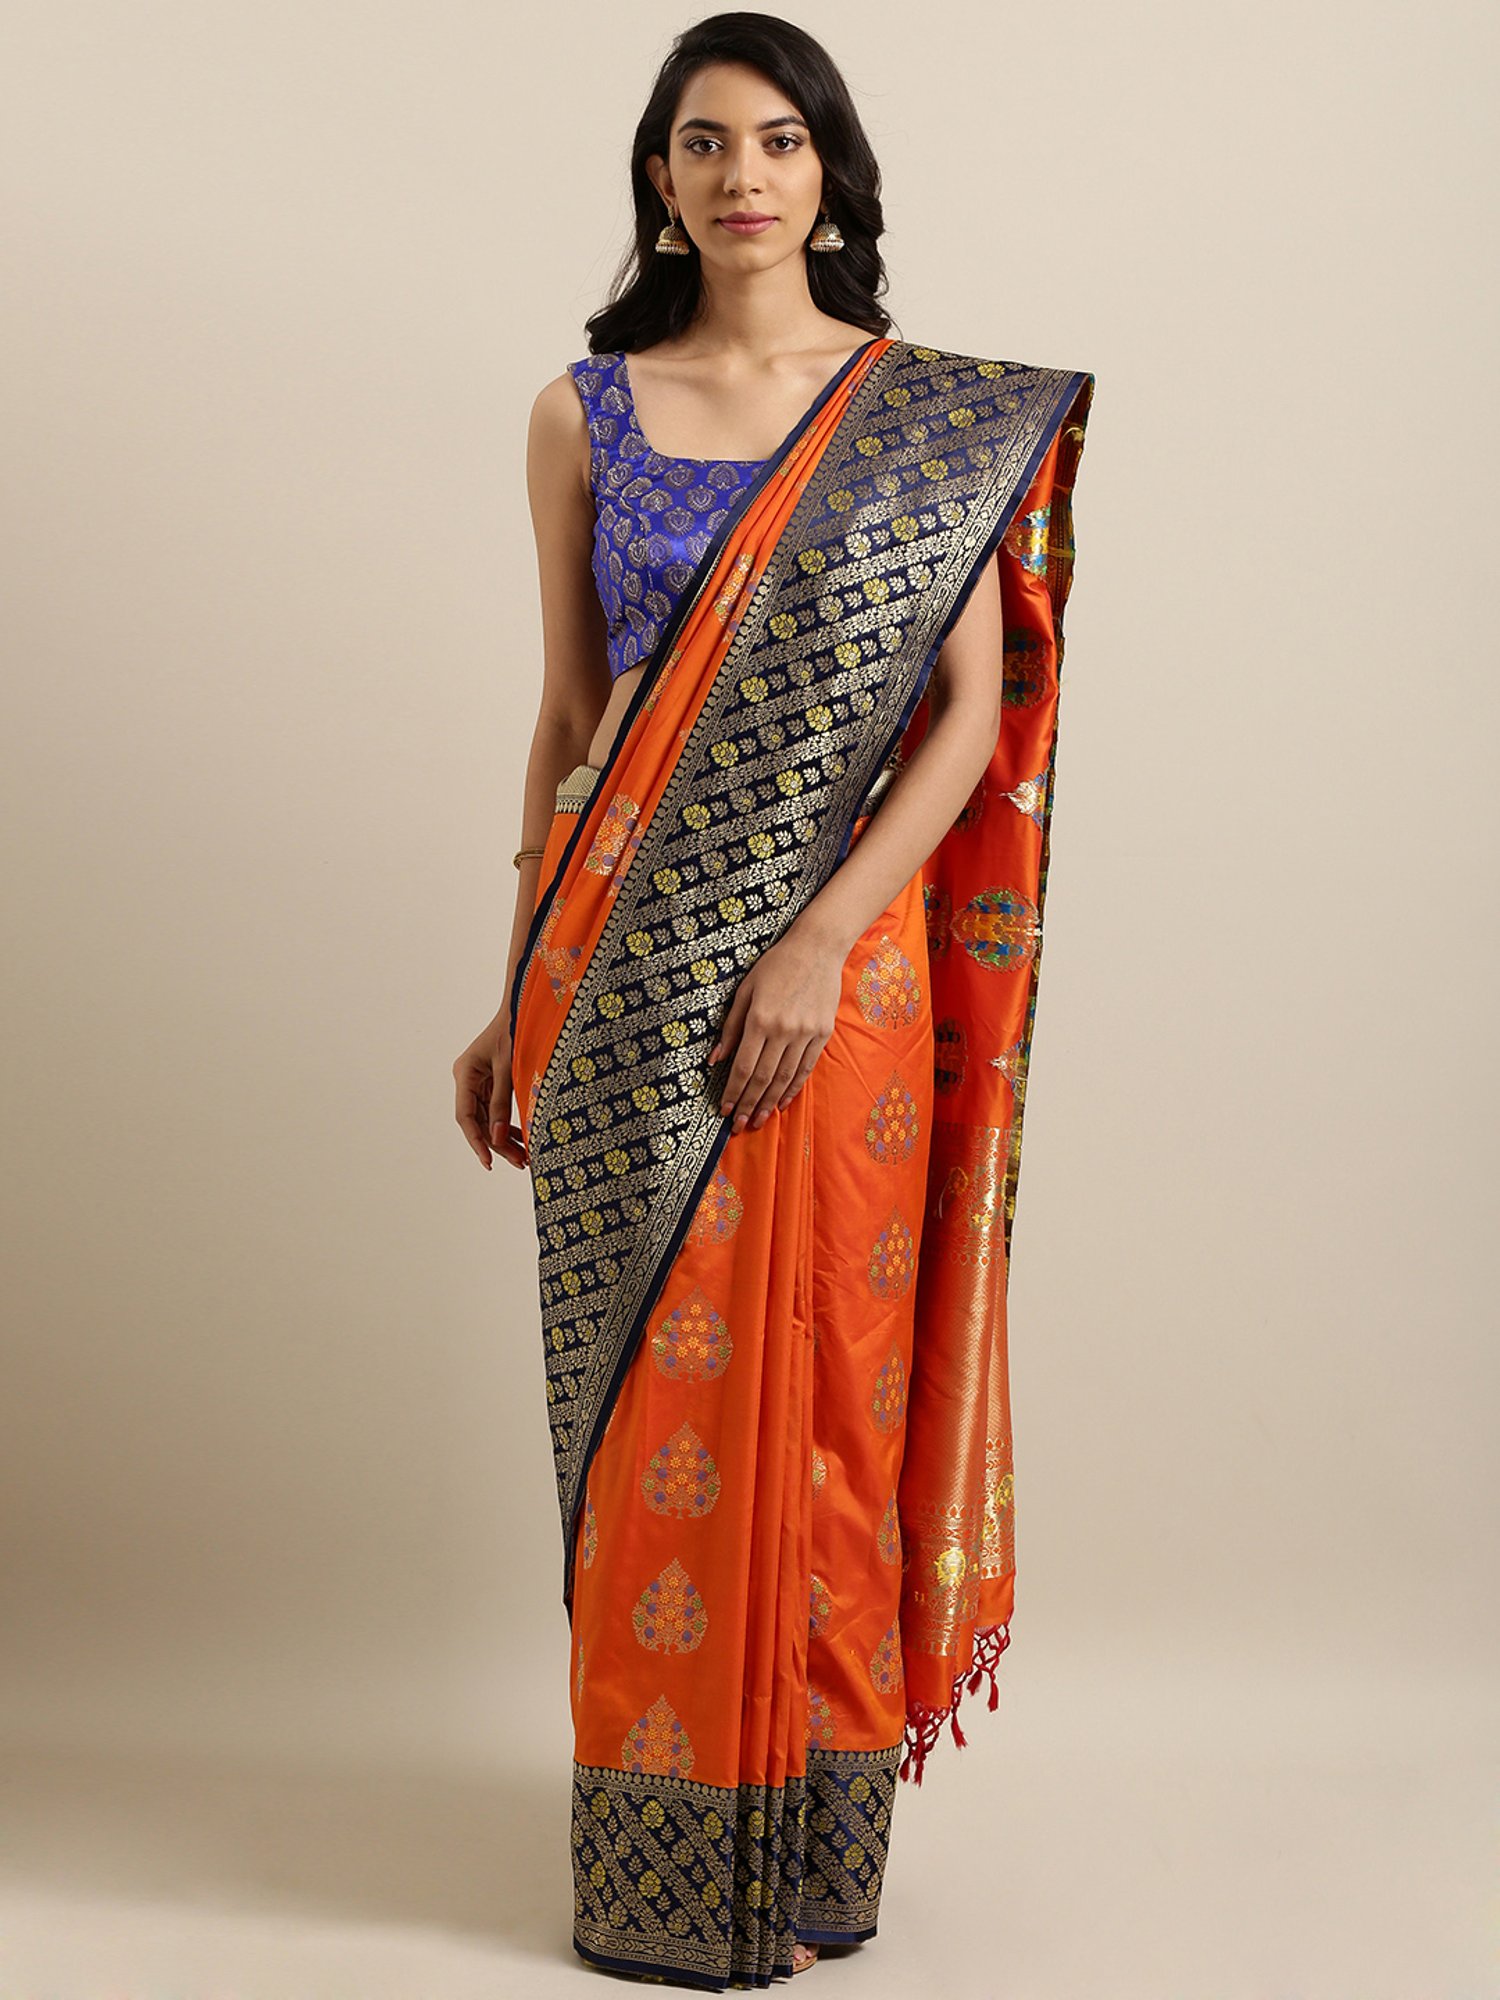 Varkala Silk Sarees Yellow & Pink Silk Blend Woven Design Paithani Saree  Price in India, Full Specifications & Offers | DTashion.com